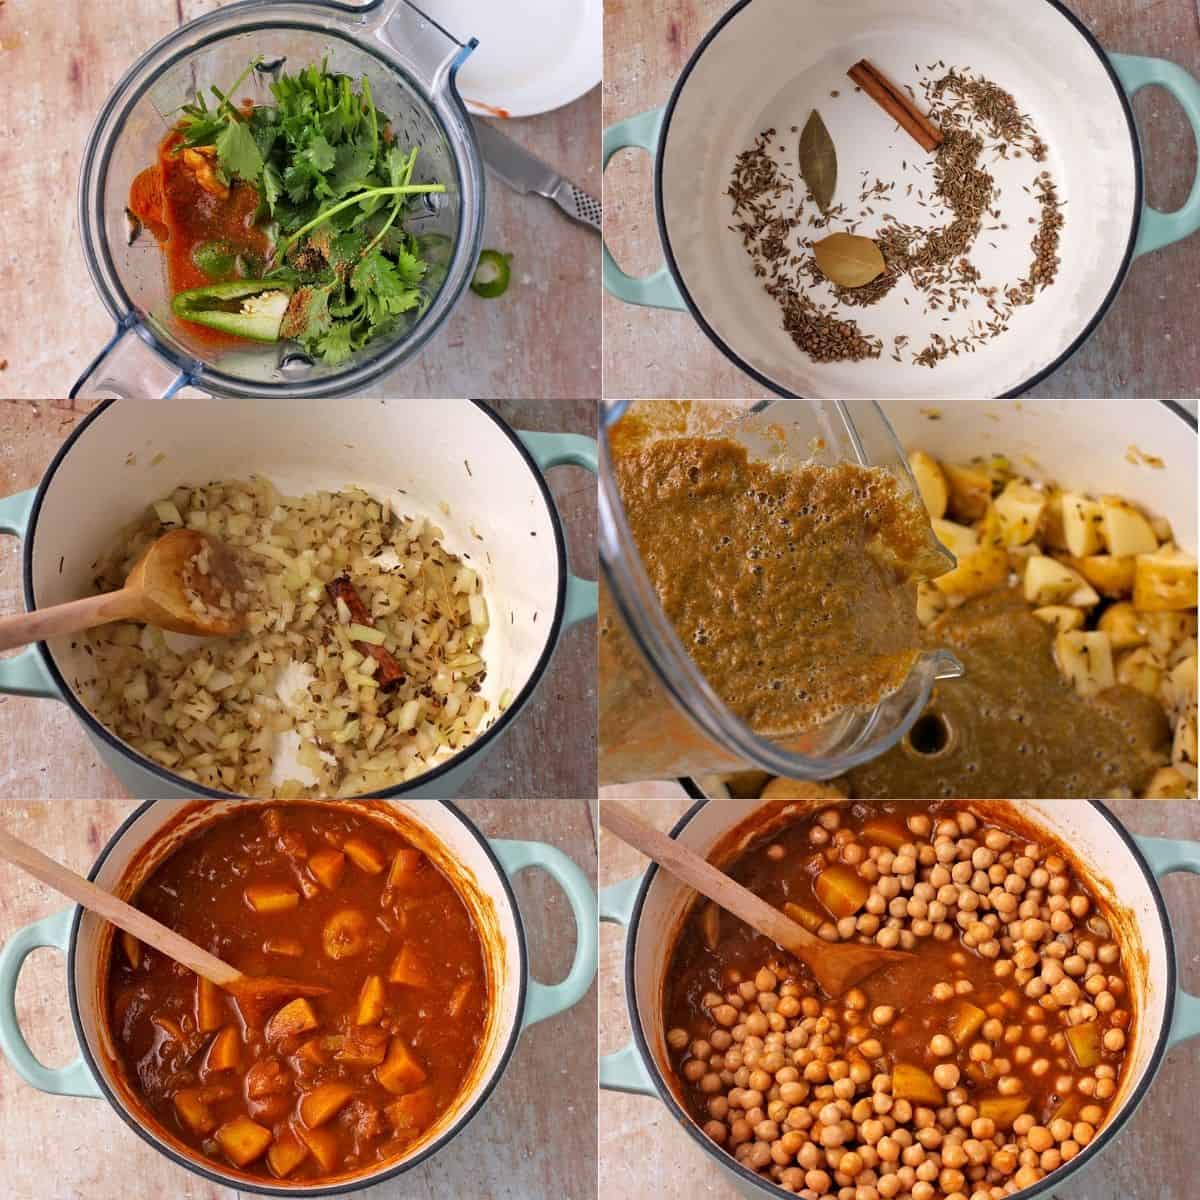 6 pictures demonstrate the steps to make chickpea and potato Indian curry.